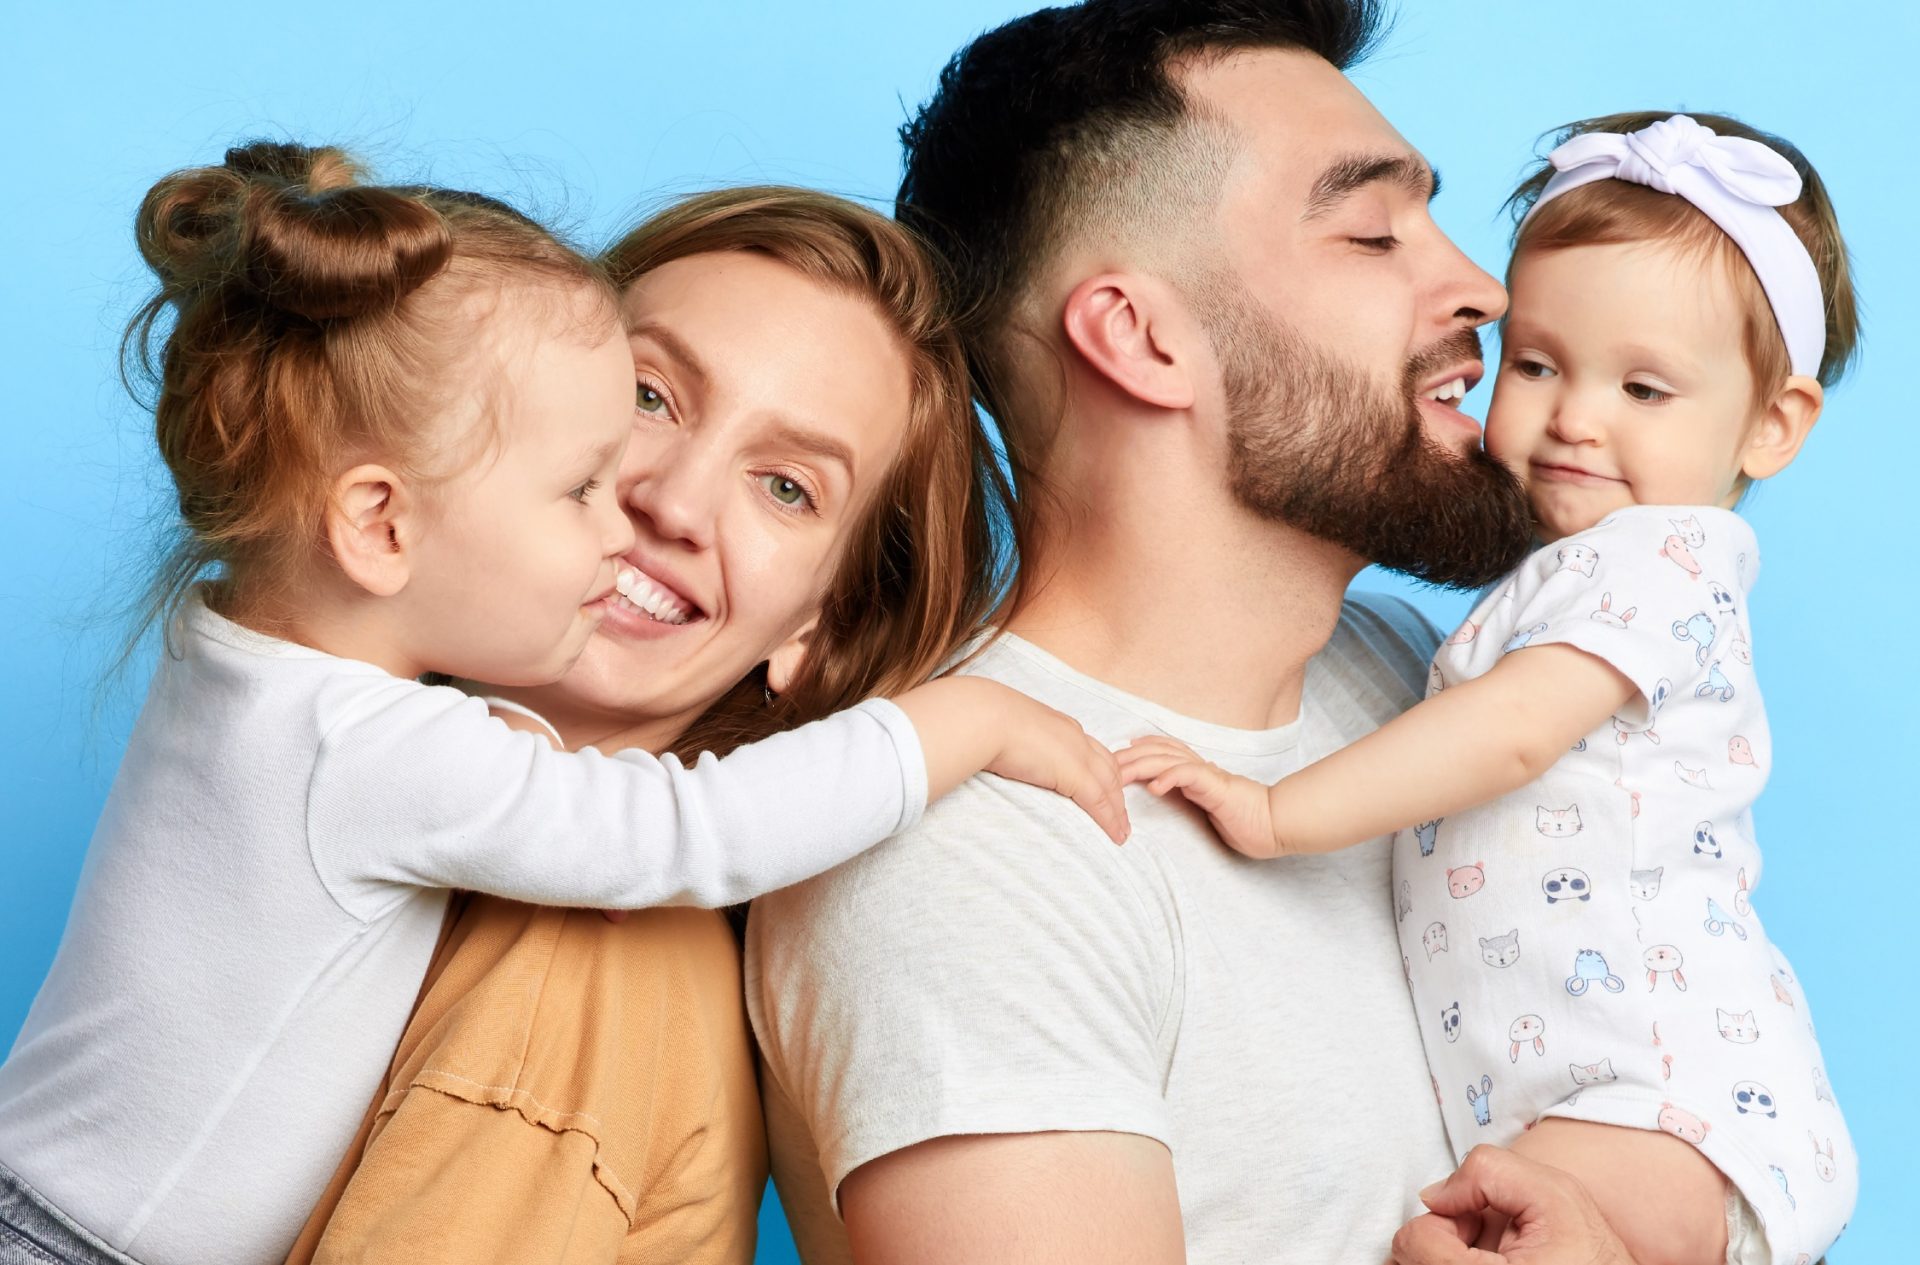 Company Introduces Fully Paid Gender-Neutral Parental Leave [Video]